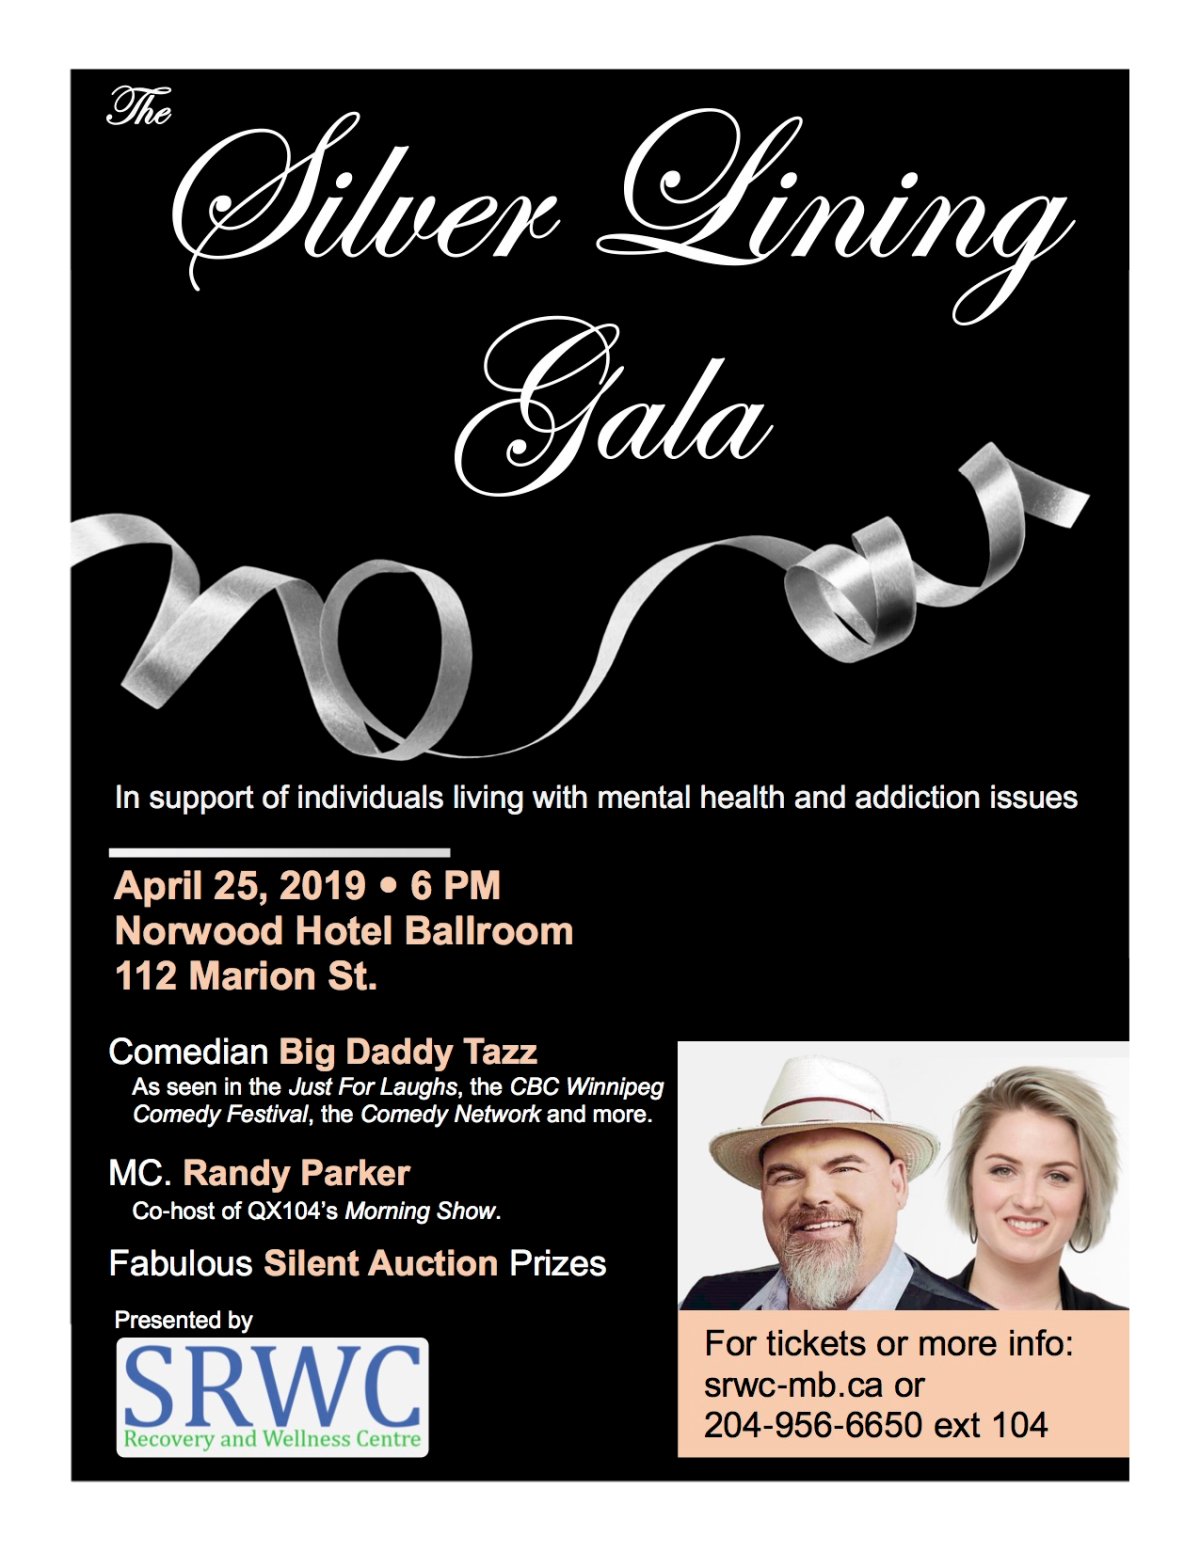 SRWC recovery and wellness Silver Lining Gala - image